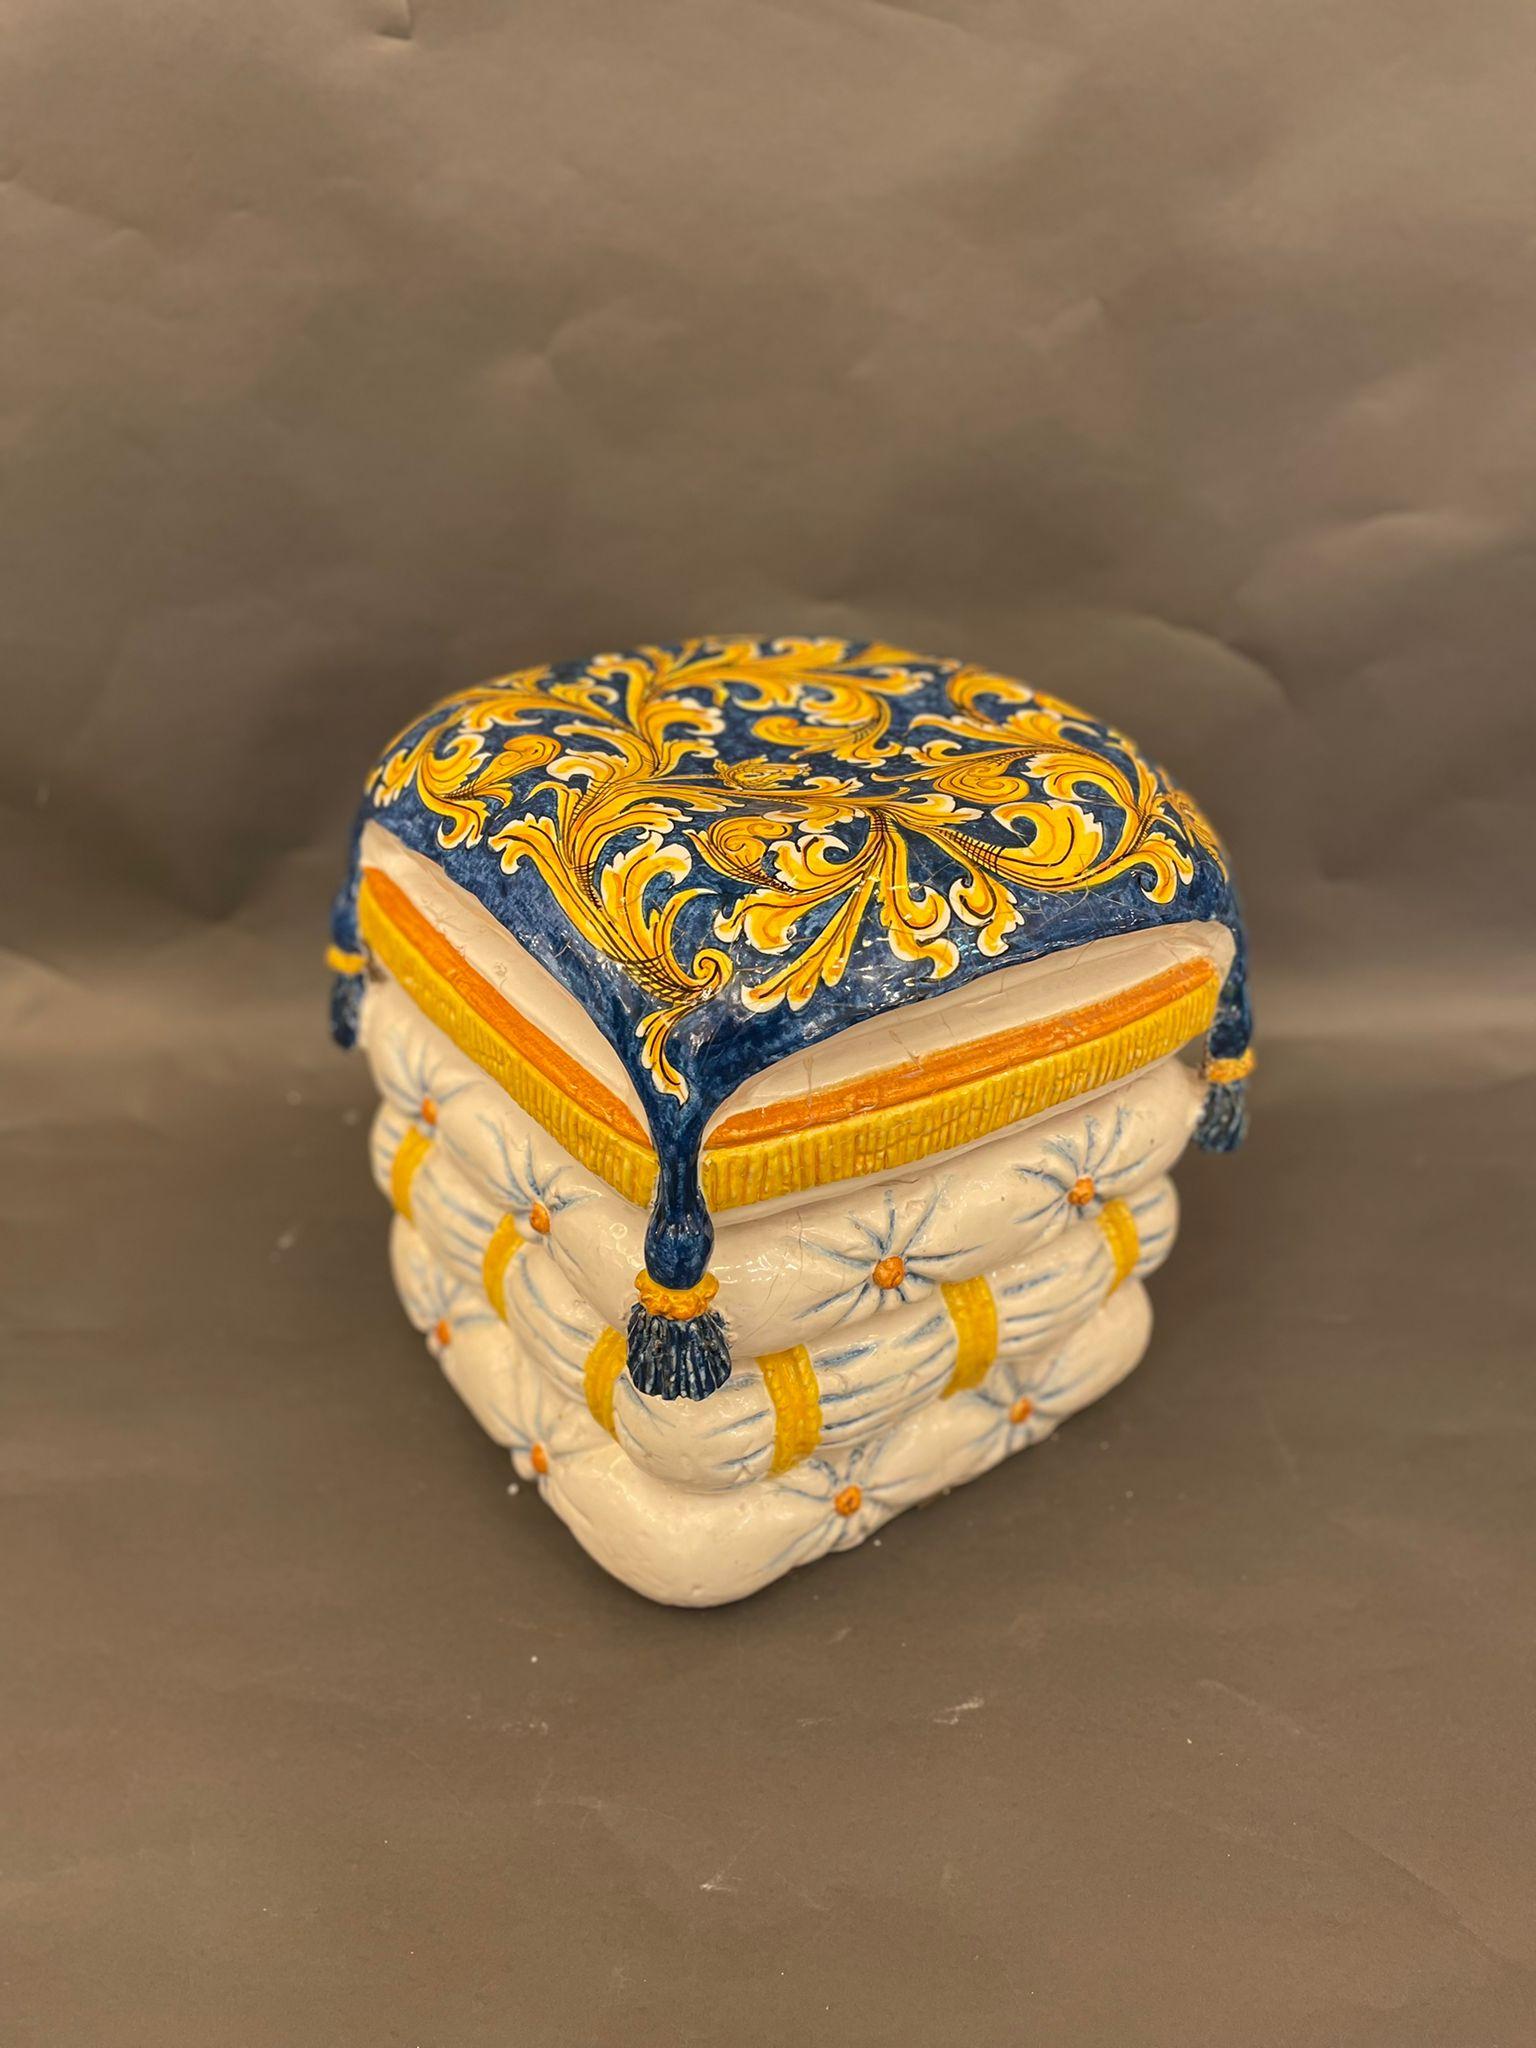 A rare Caltagirone Terracotta Ottoman hand painted in the traditional Sicilian blue, yellow and ocher tones. Sicily 1970s

Excellent vintage condition